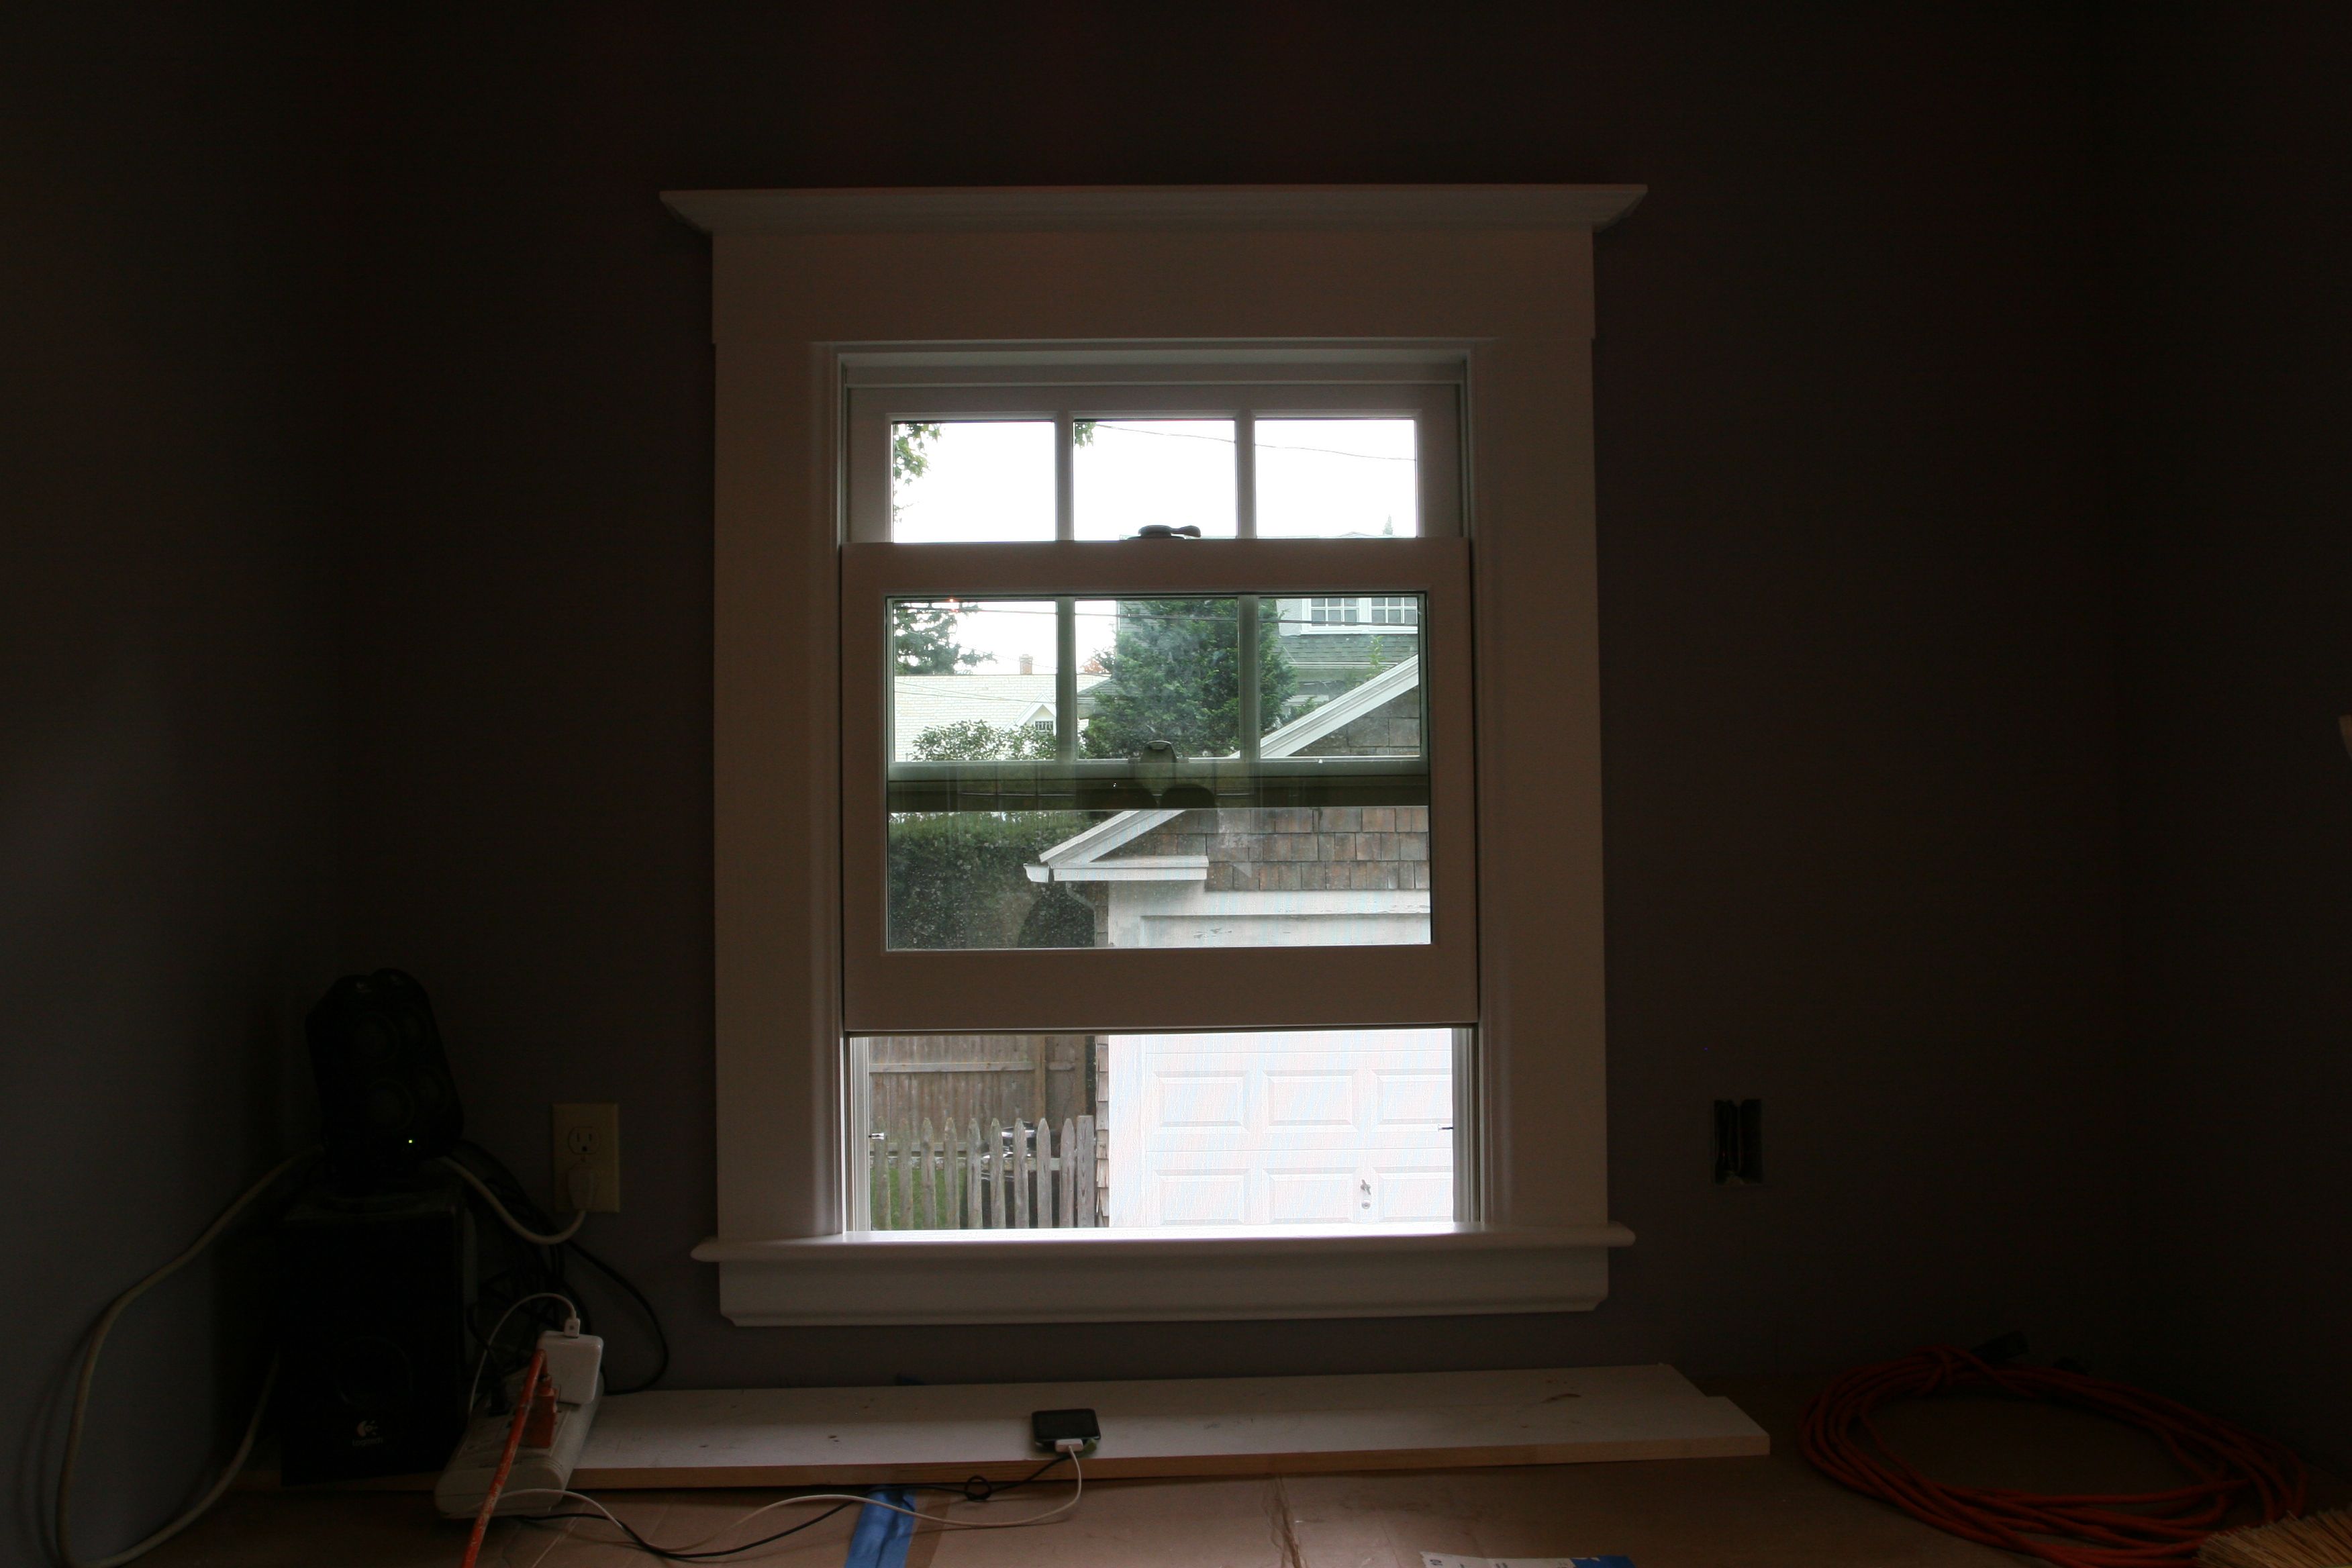 And this window is trimmed.